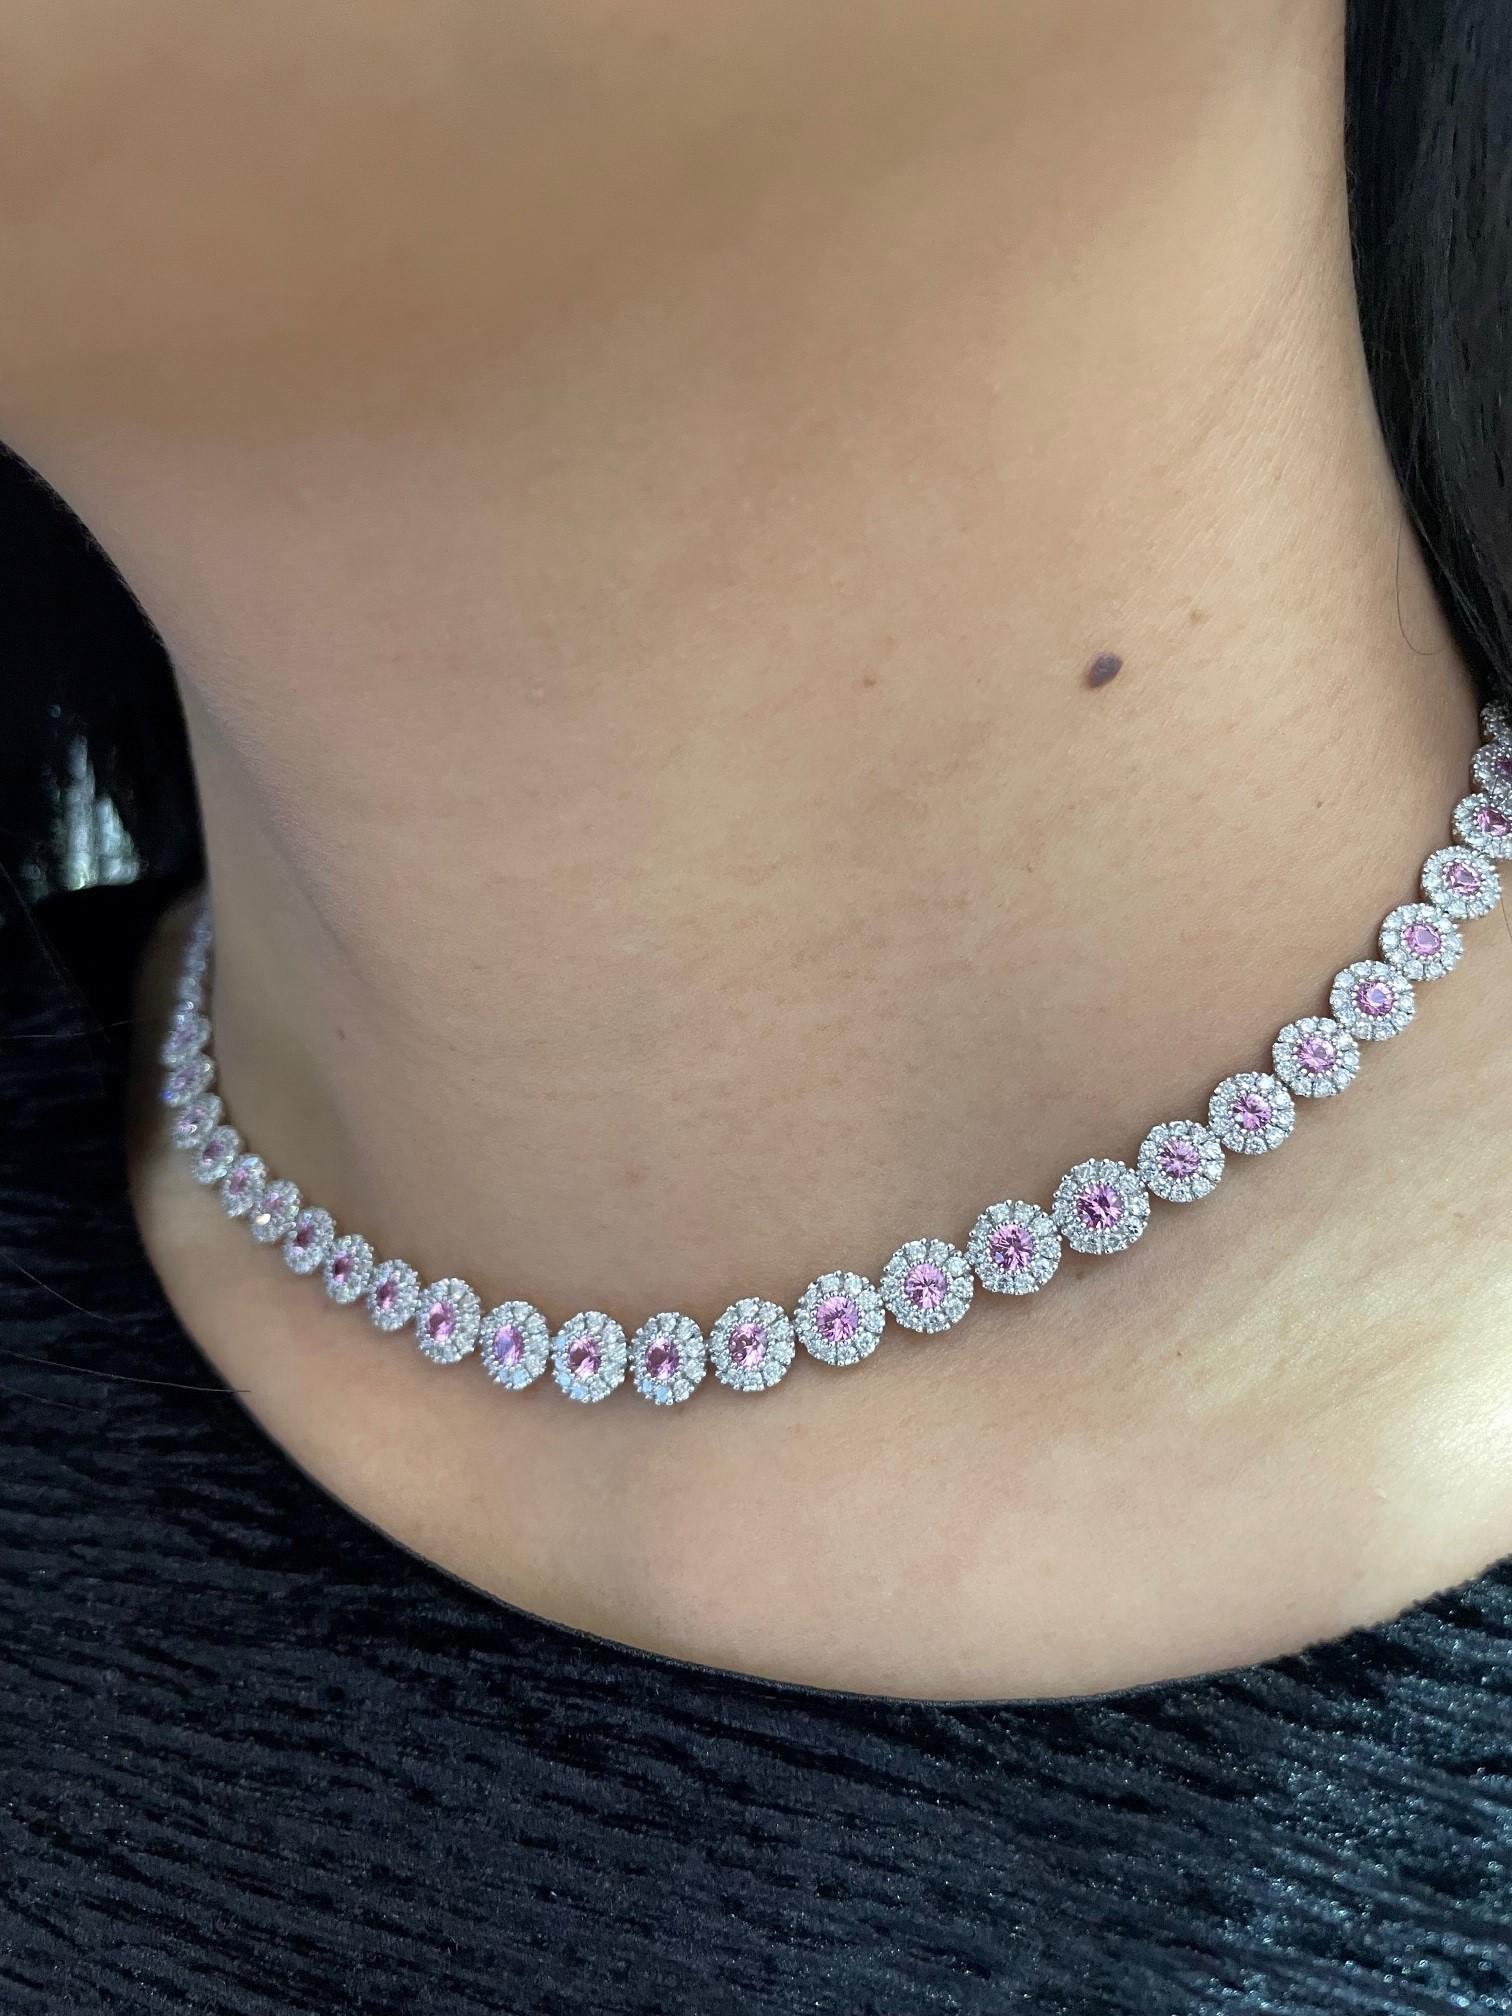 14 Karat White Gold 6.89 Carat Total Pink Sapphire and Diamond Necklace In New Condition For Sale In La Jolla, CA